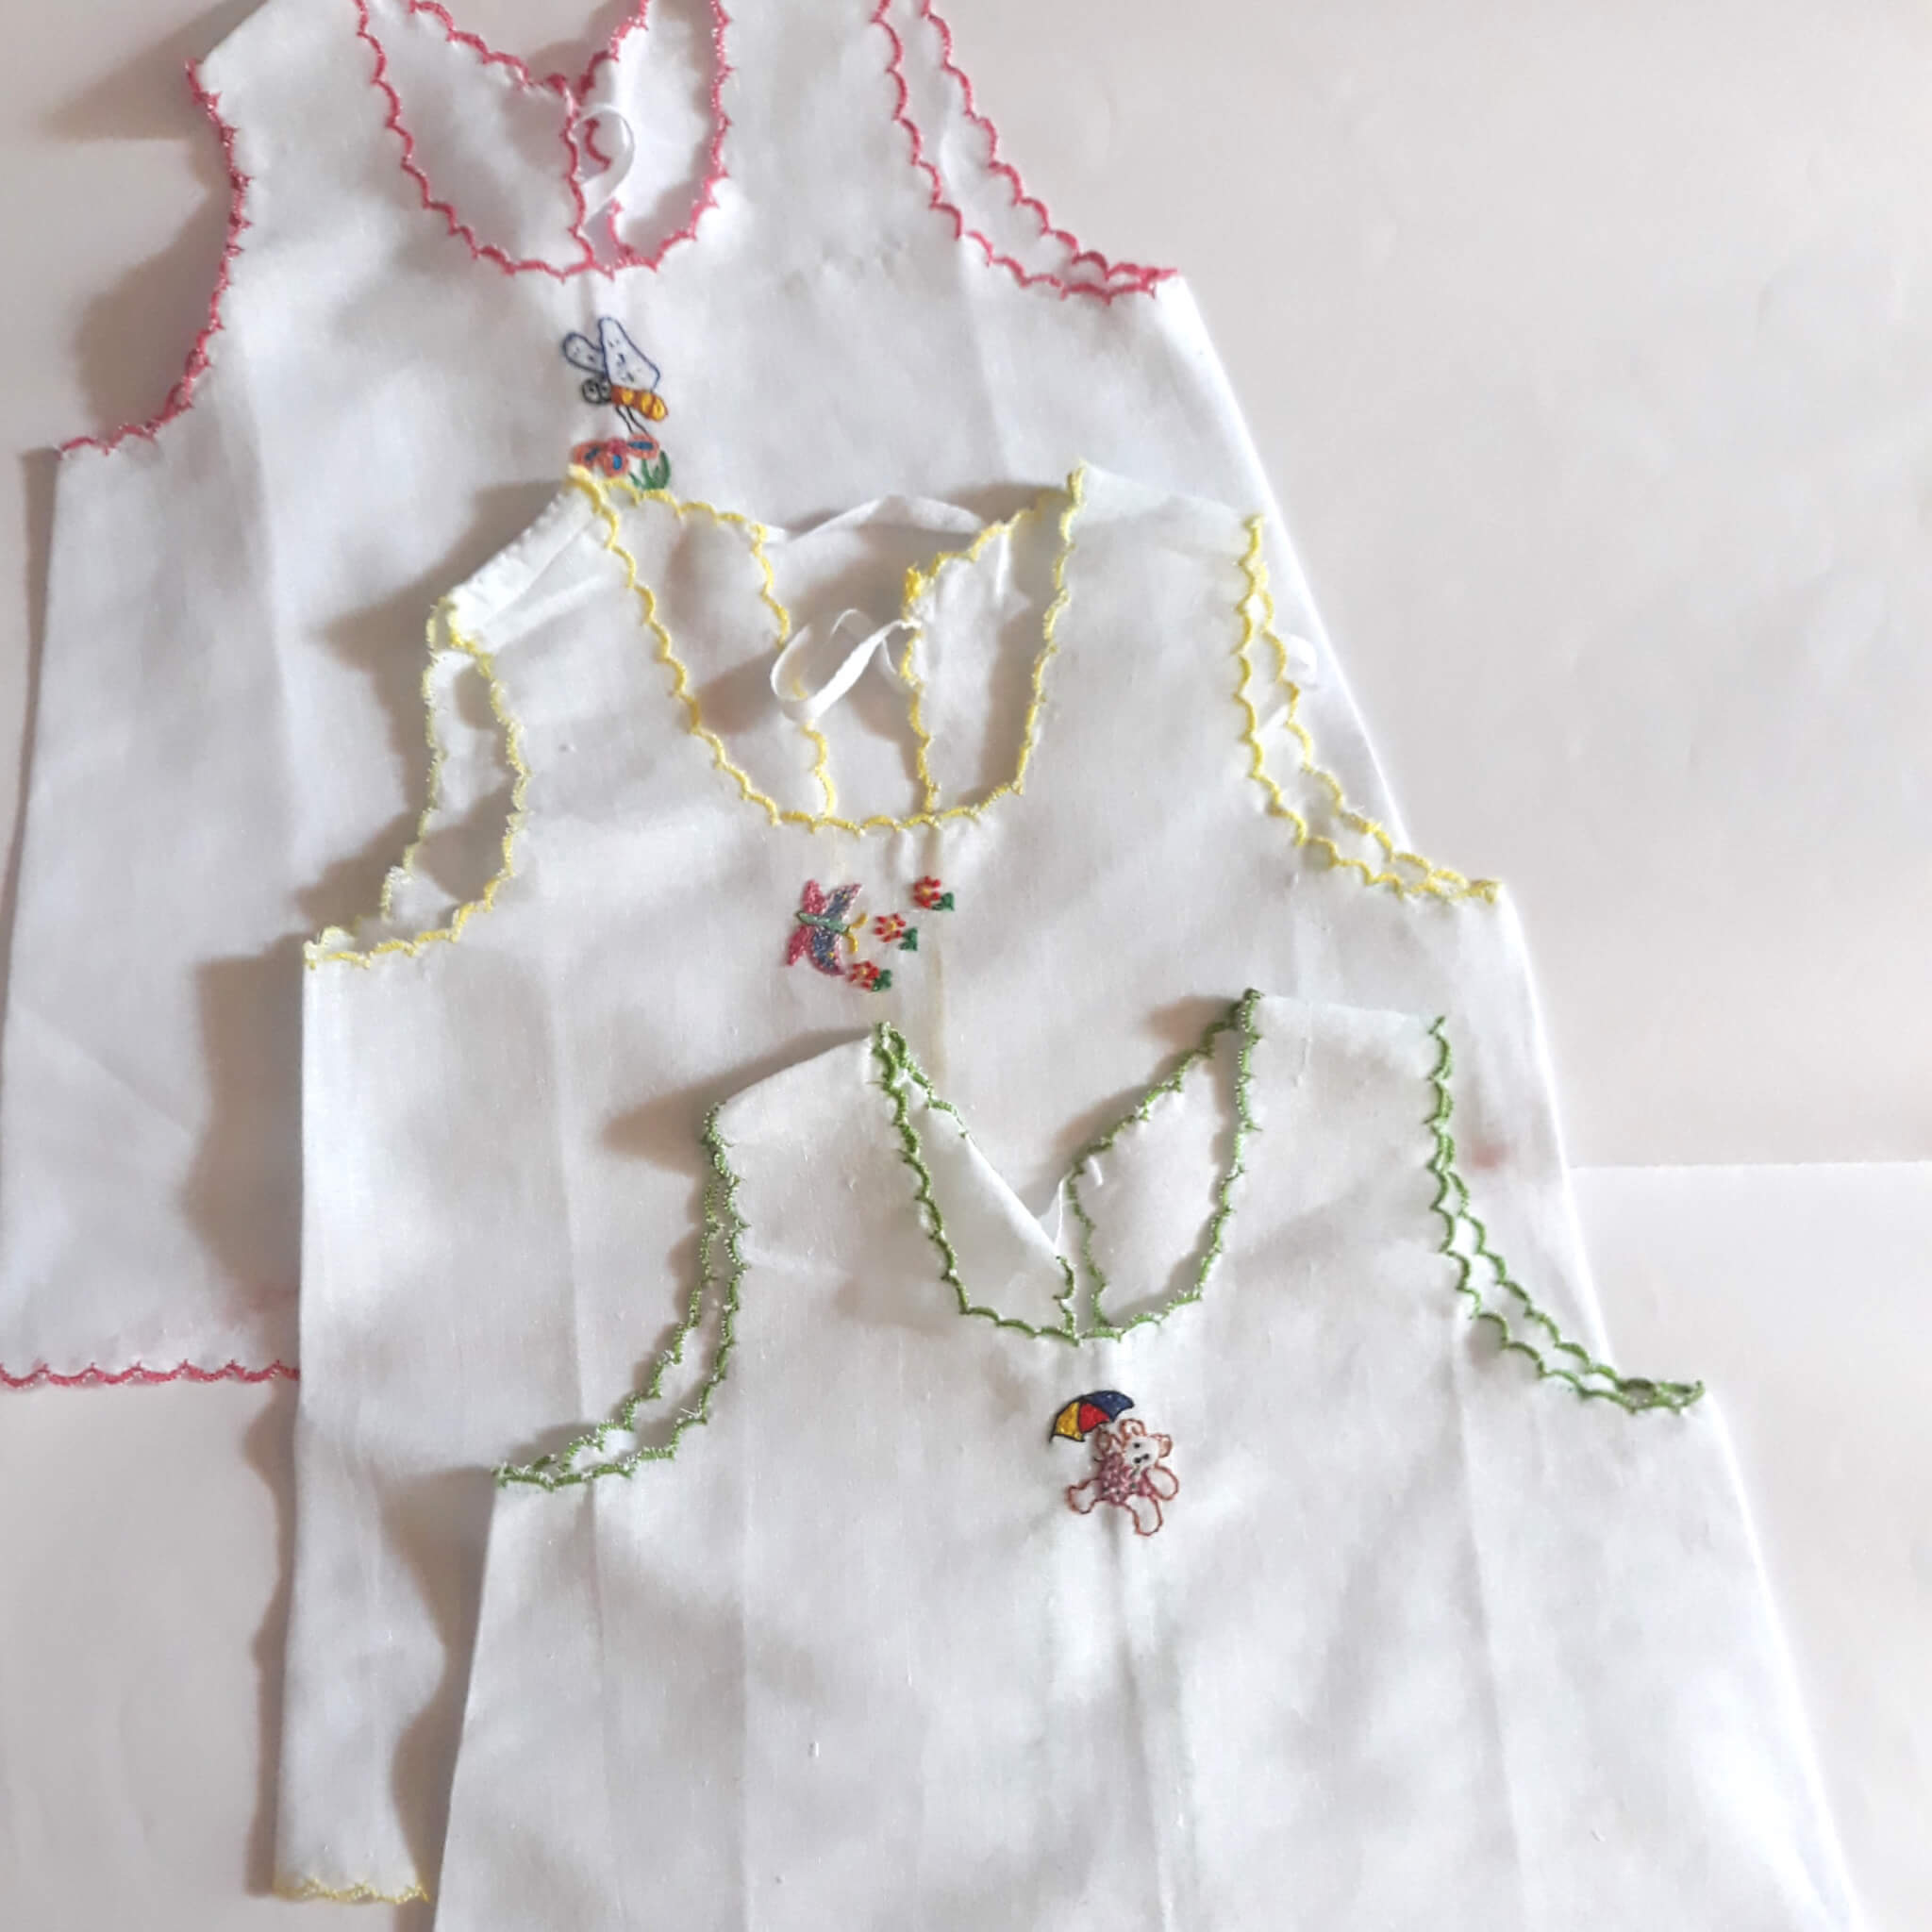 new born baby dress embroidery